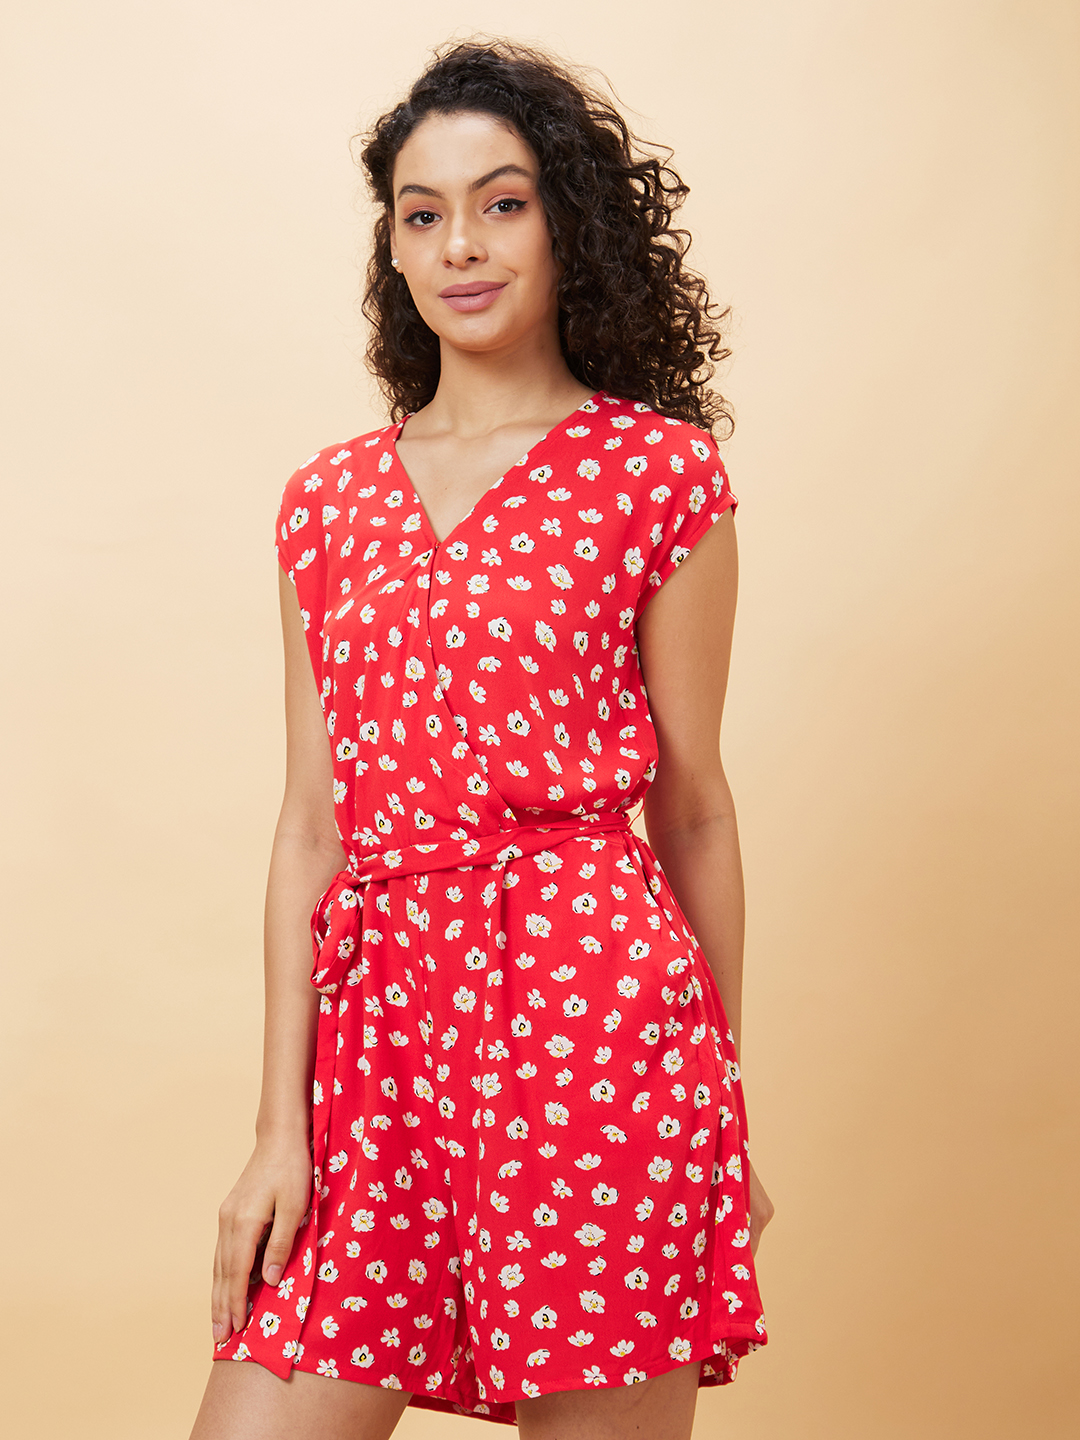 Globus Women Red Printed V-Neck Playsuit with Waist Tie-Ups